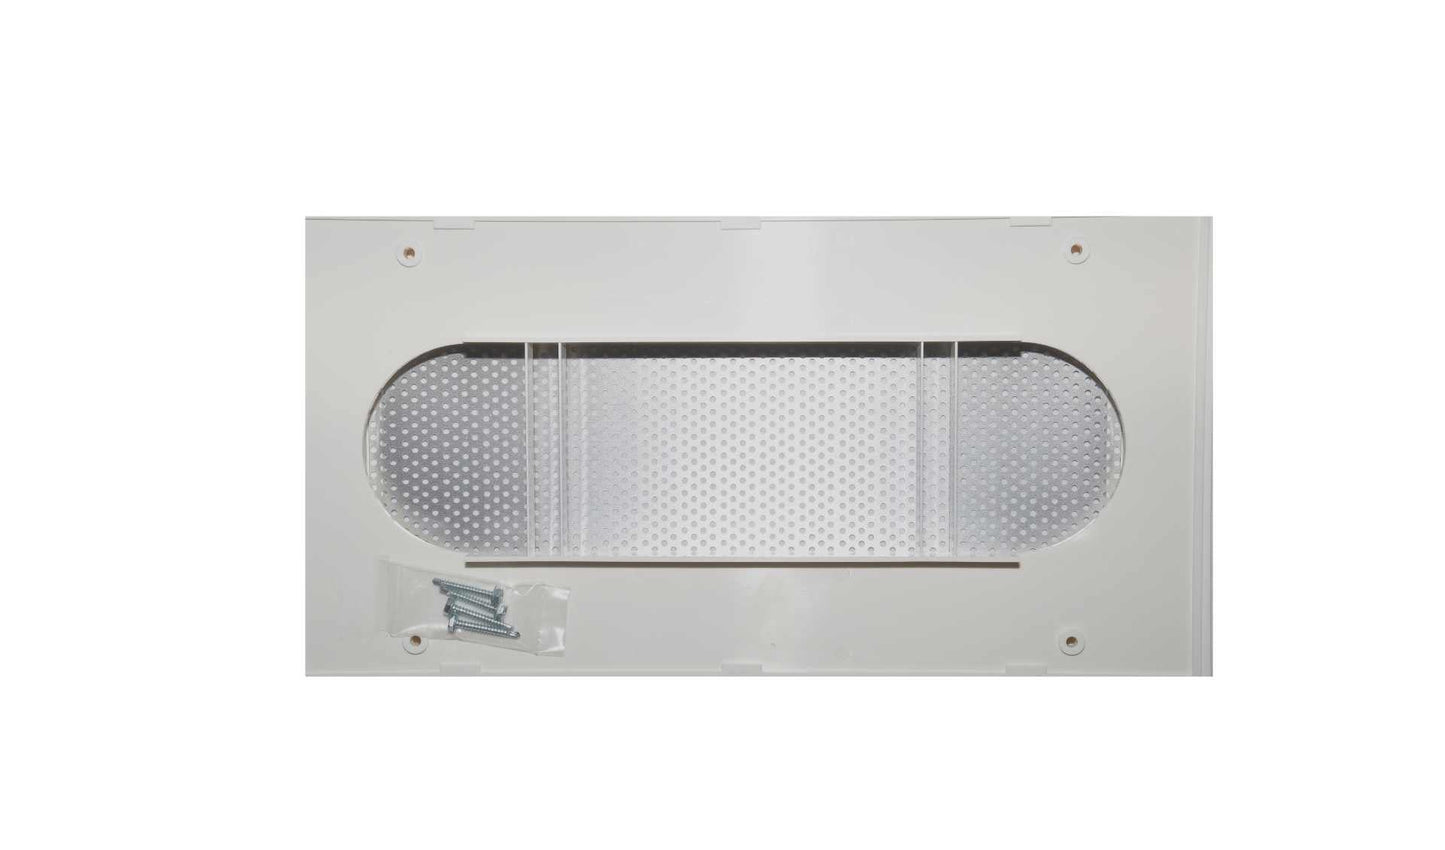 Replacement Oval Soffit Vent 4"W x 12"L, ASA Resin and self-aligning frame, with removal metal screen, White